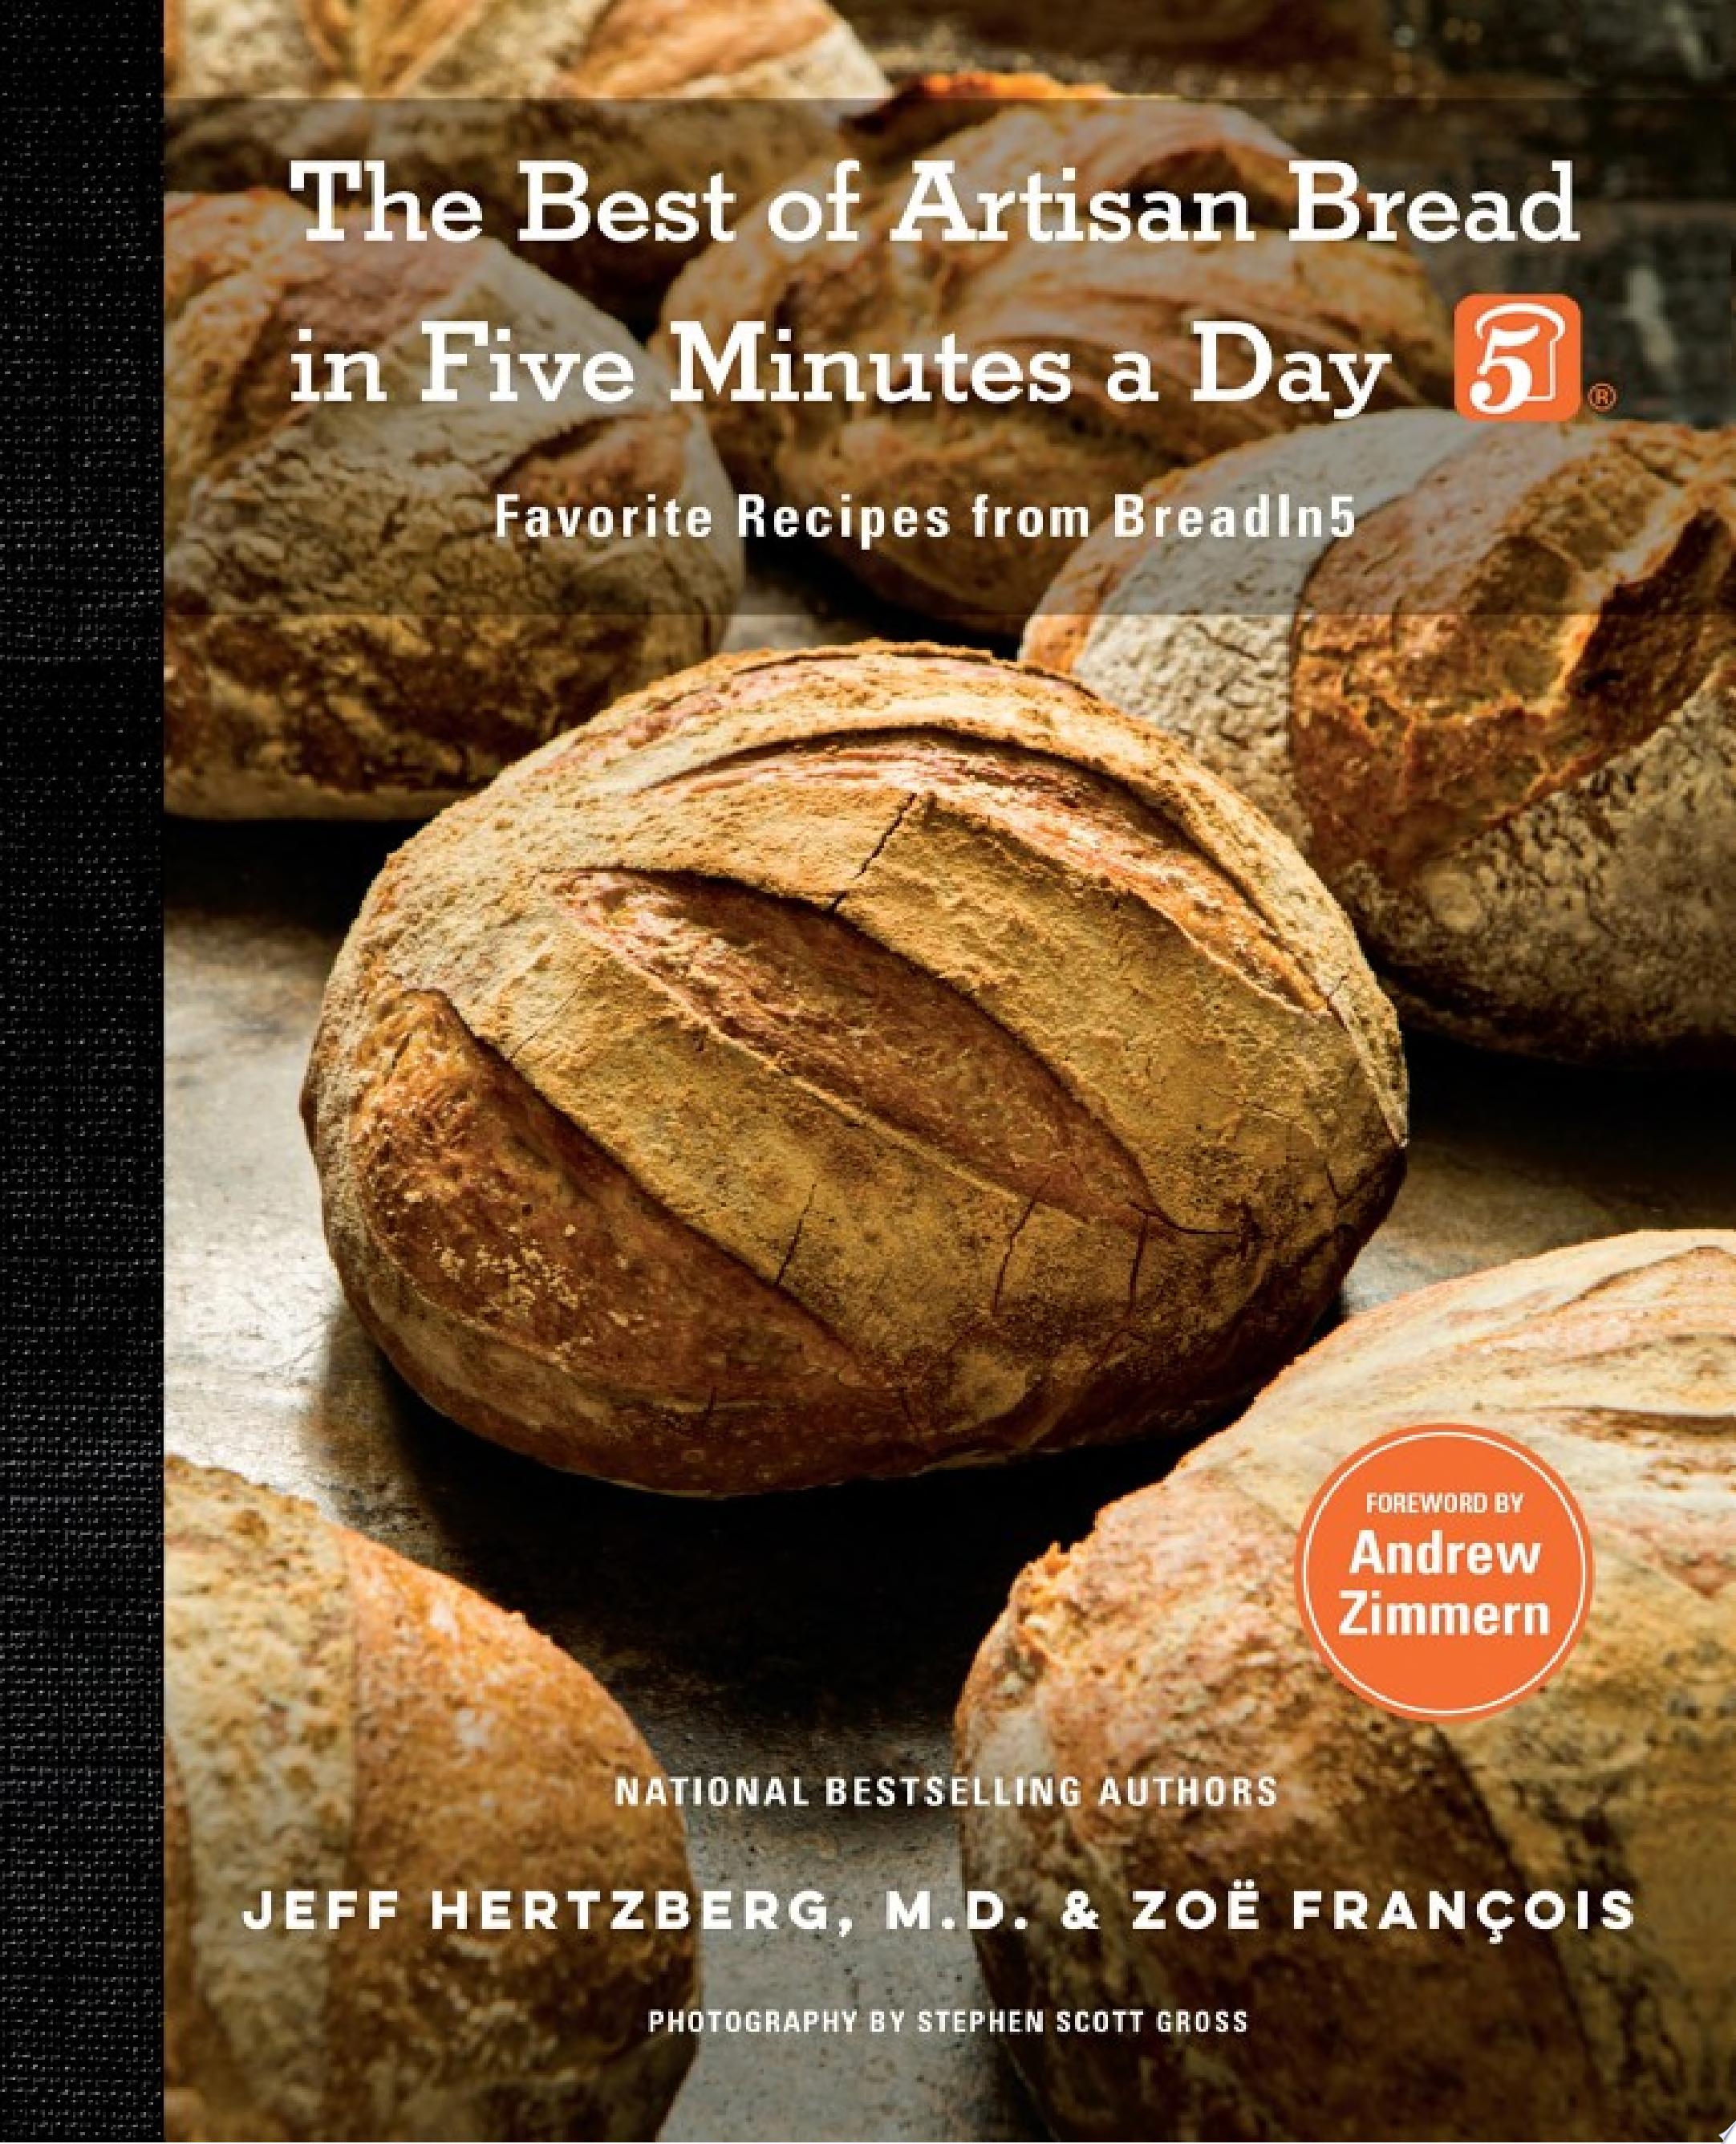 Image for "The Best of Artisan Bread in Five Minutes a Day"